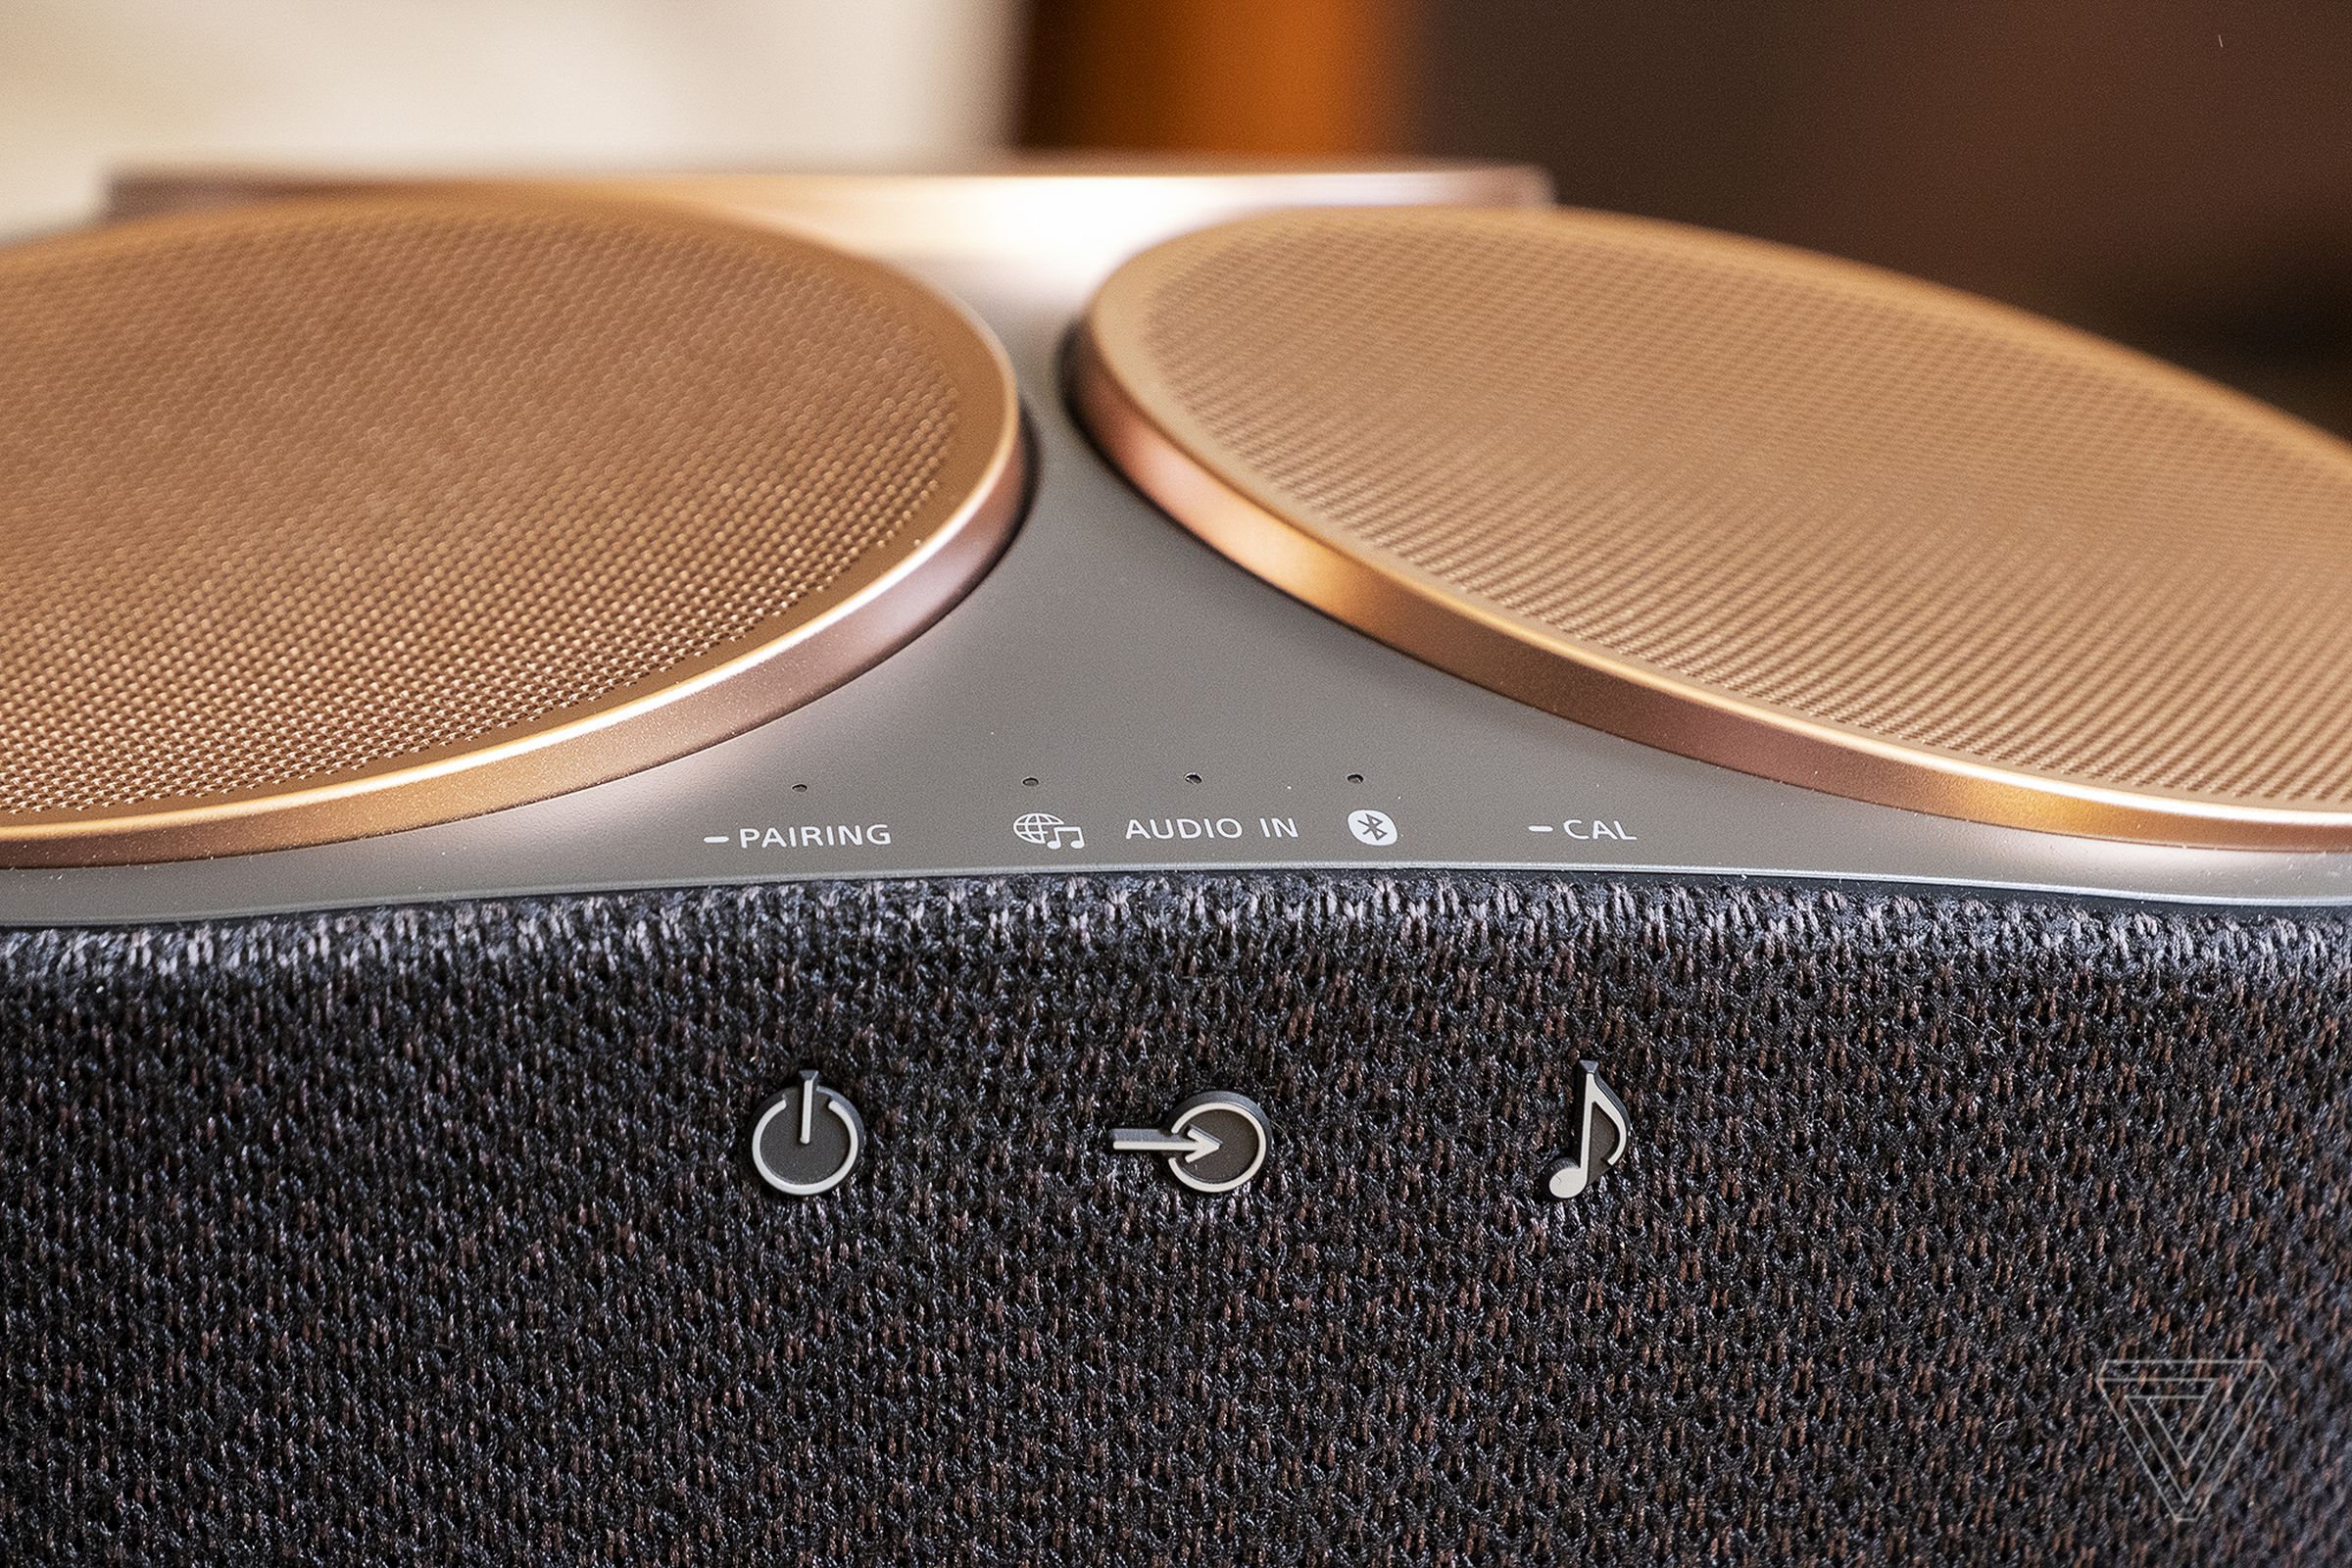 The speaker supports music over Wi-Fi, Bluetooth, or aux input.